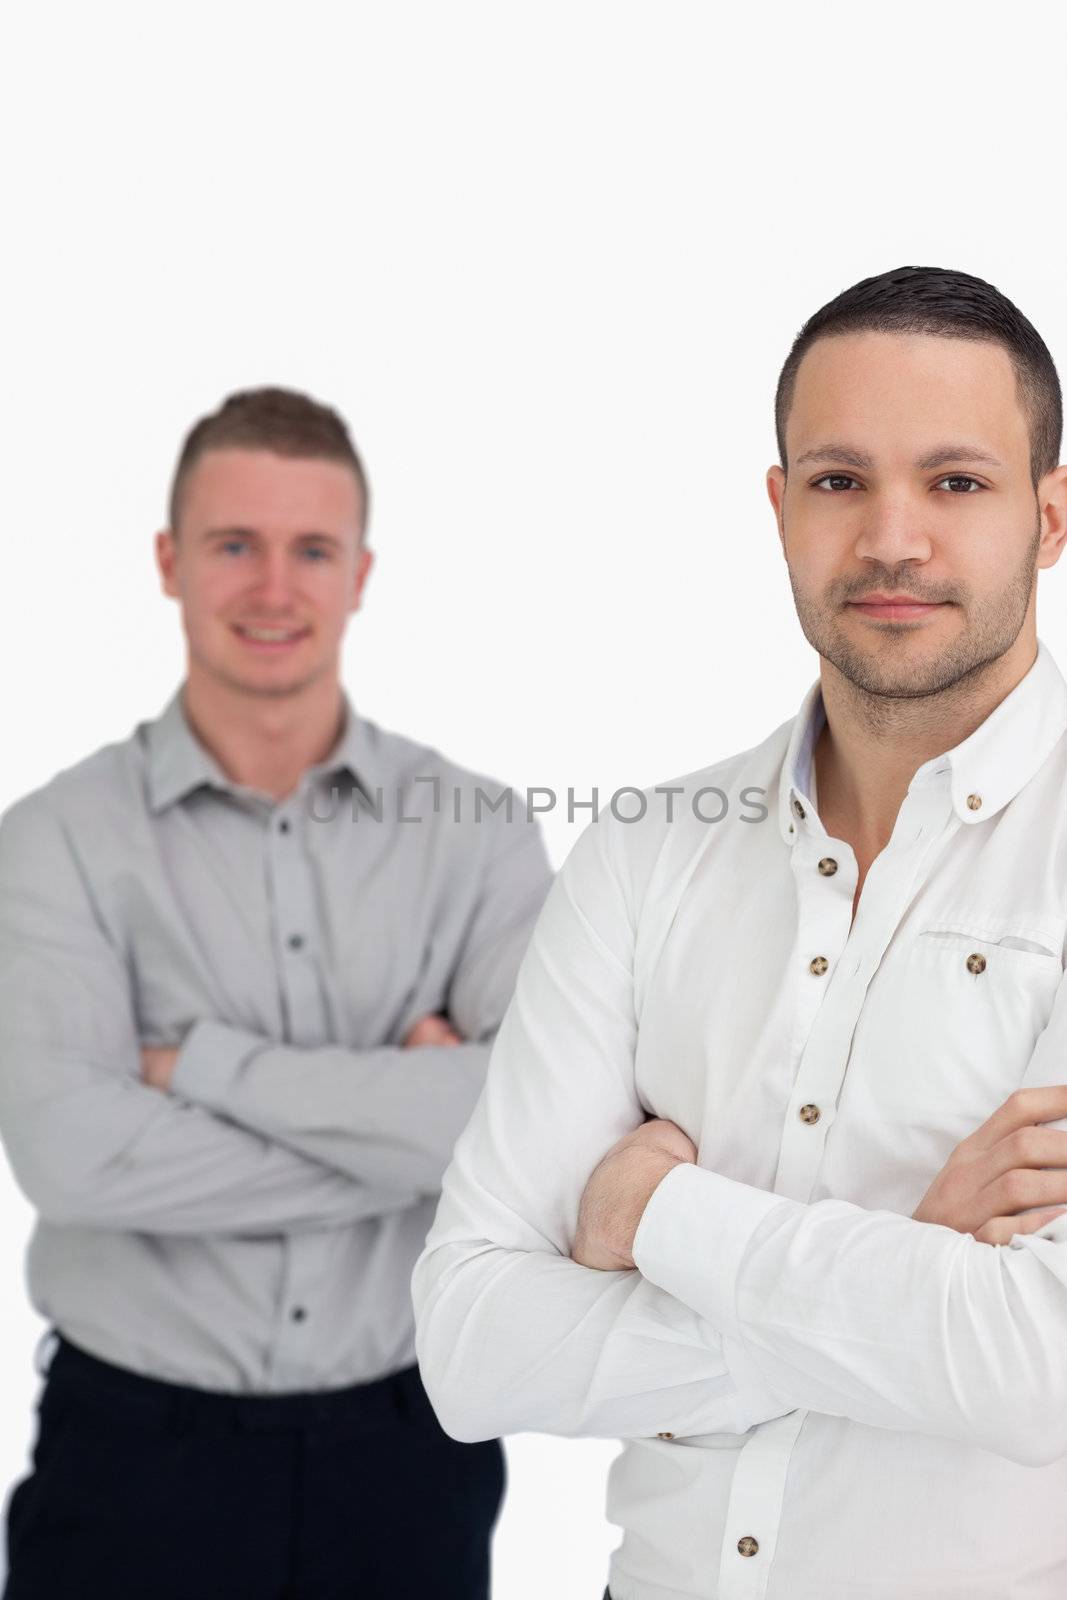 Two men crossing their arms as they stand up against a white background